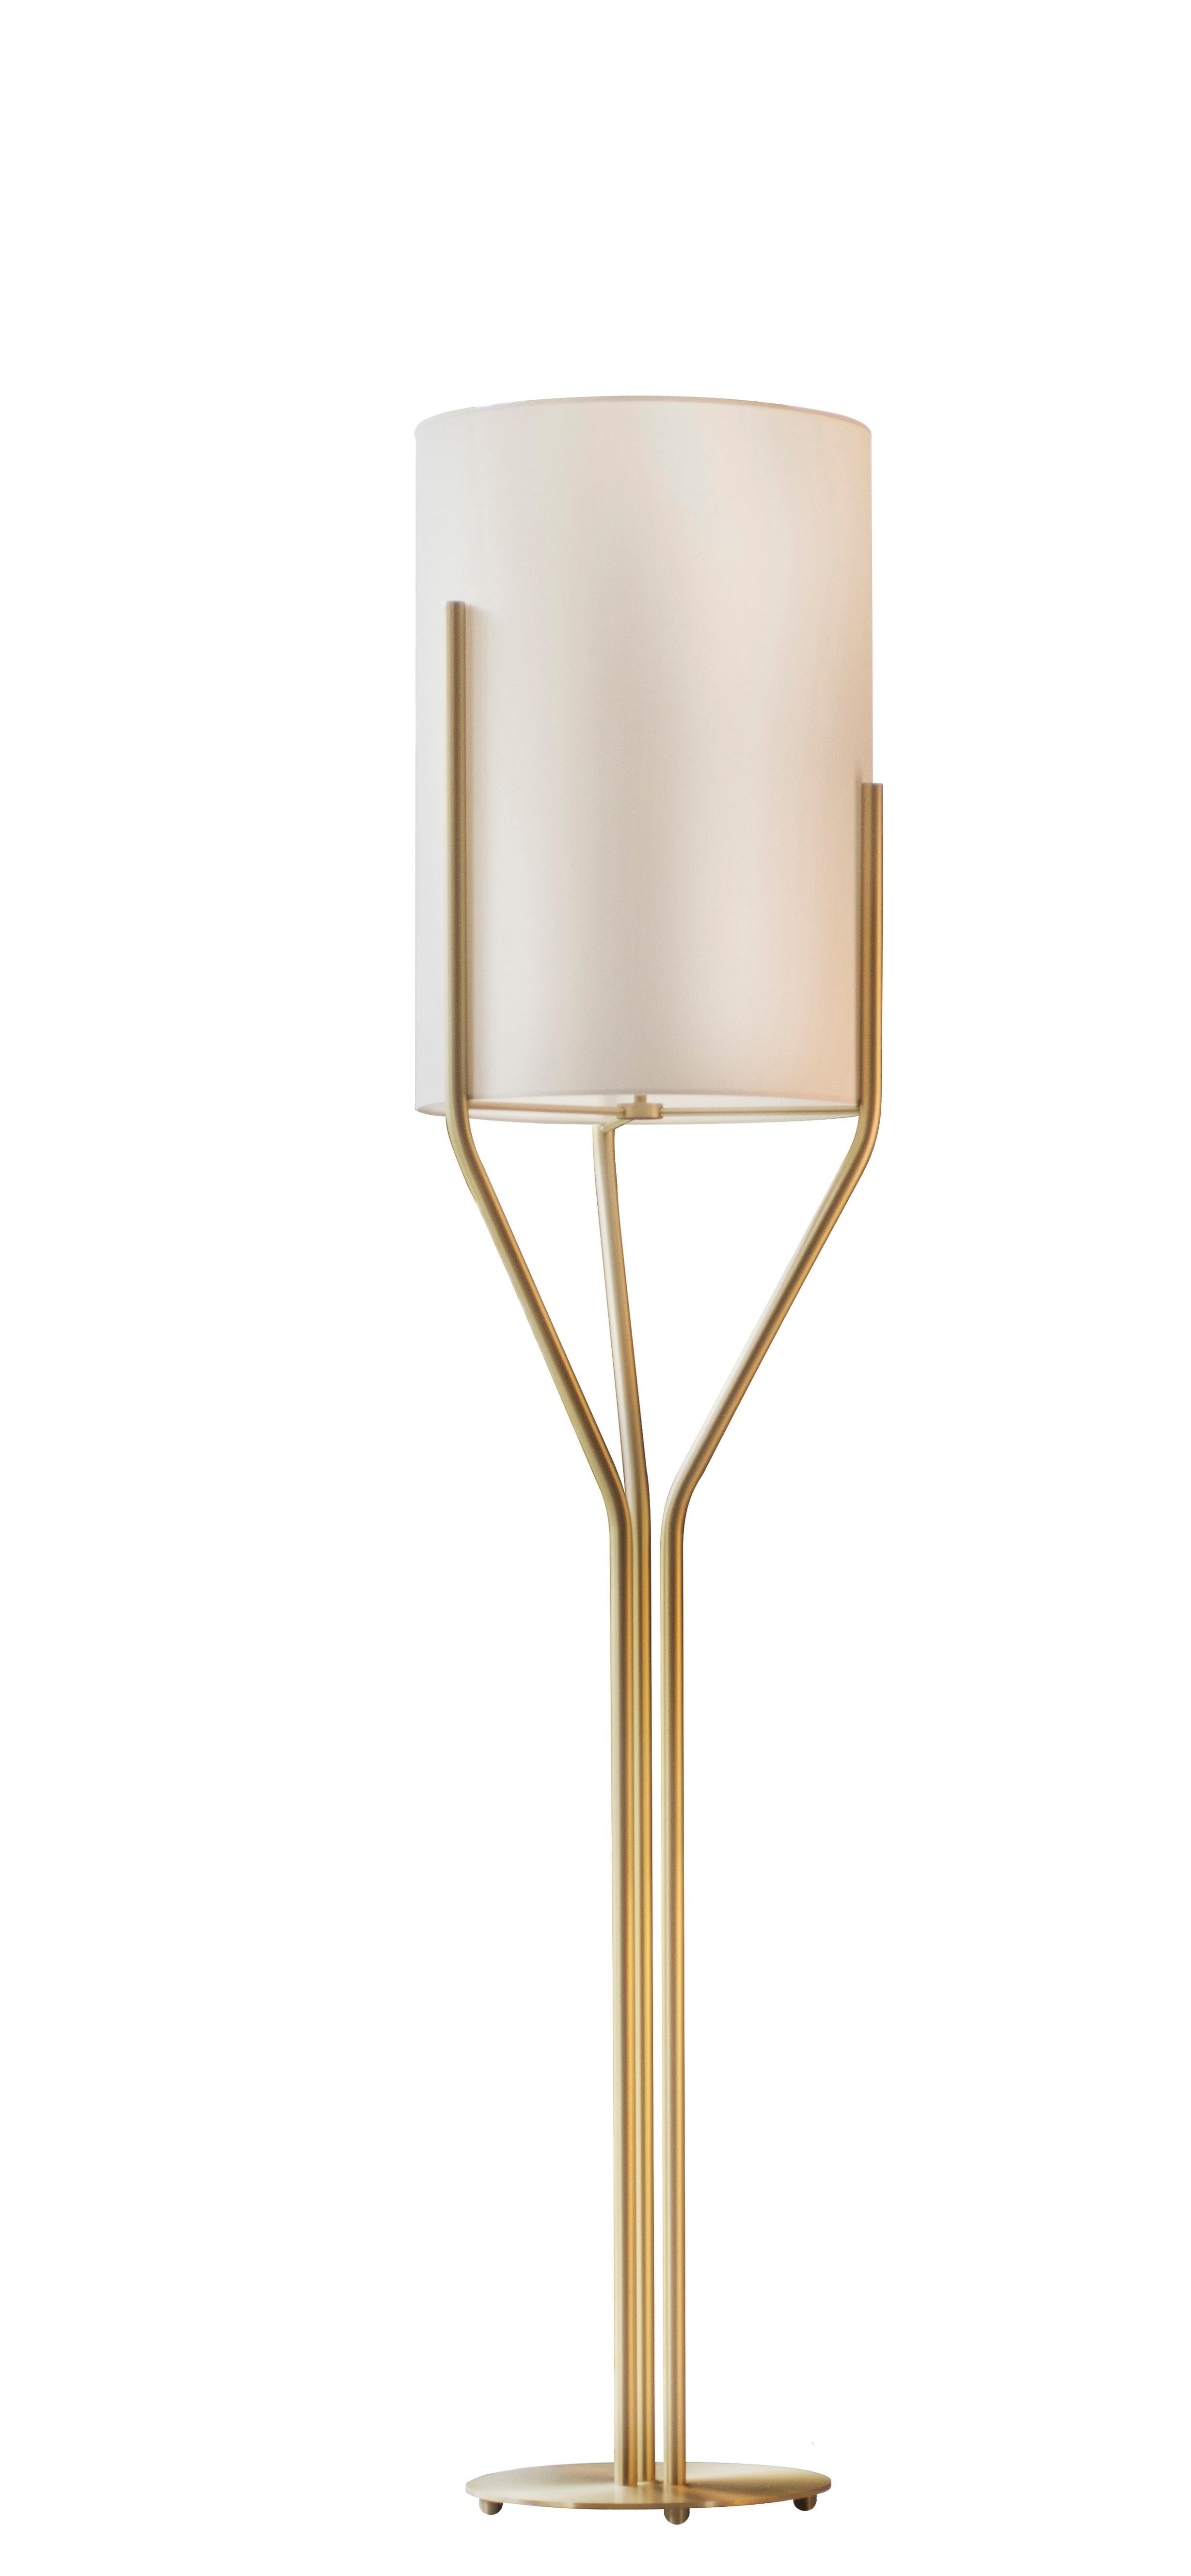 Arborescence XL satin brass floor lamp by Hervé Langlais
Dimensions: D40 X H180 cm
Materials: solid brass, lampshade drop paper® m1, black textile cable (2m).
Others finishes and dimensions are available.

All our lamps can be wired according to